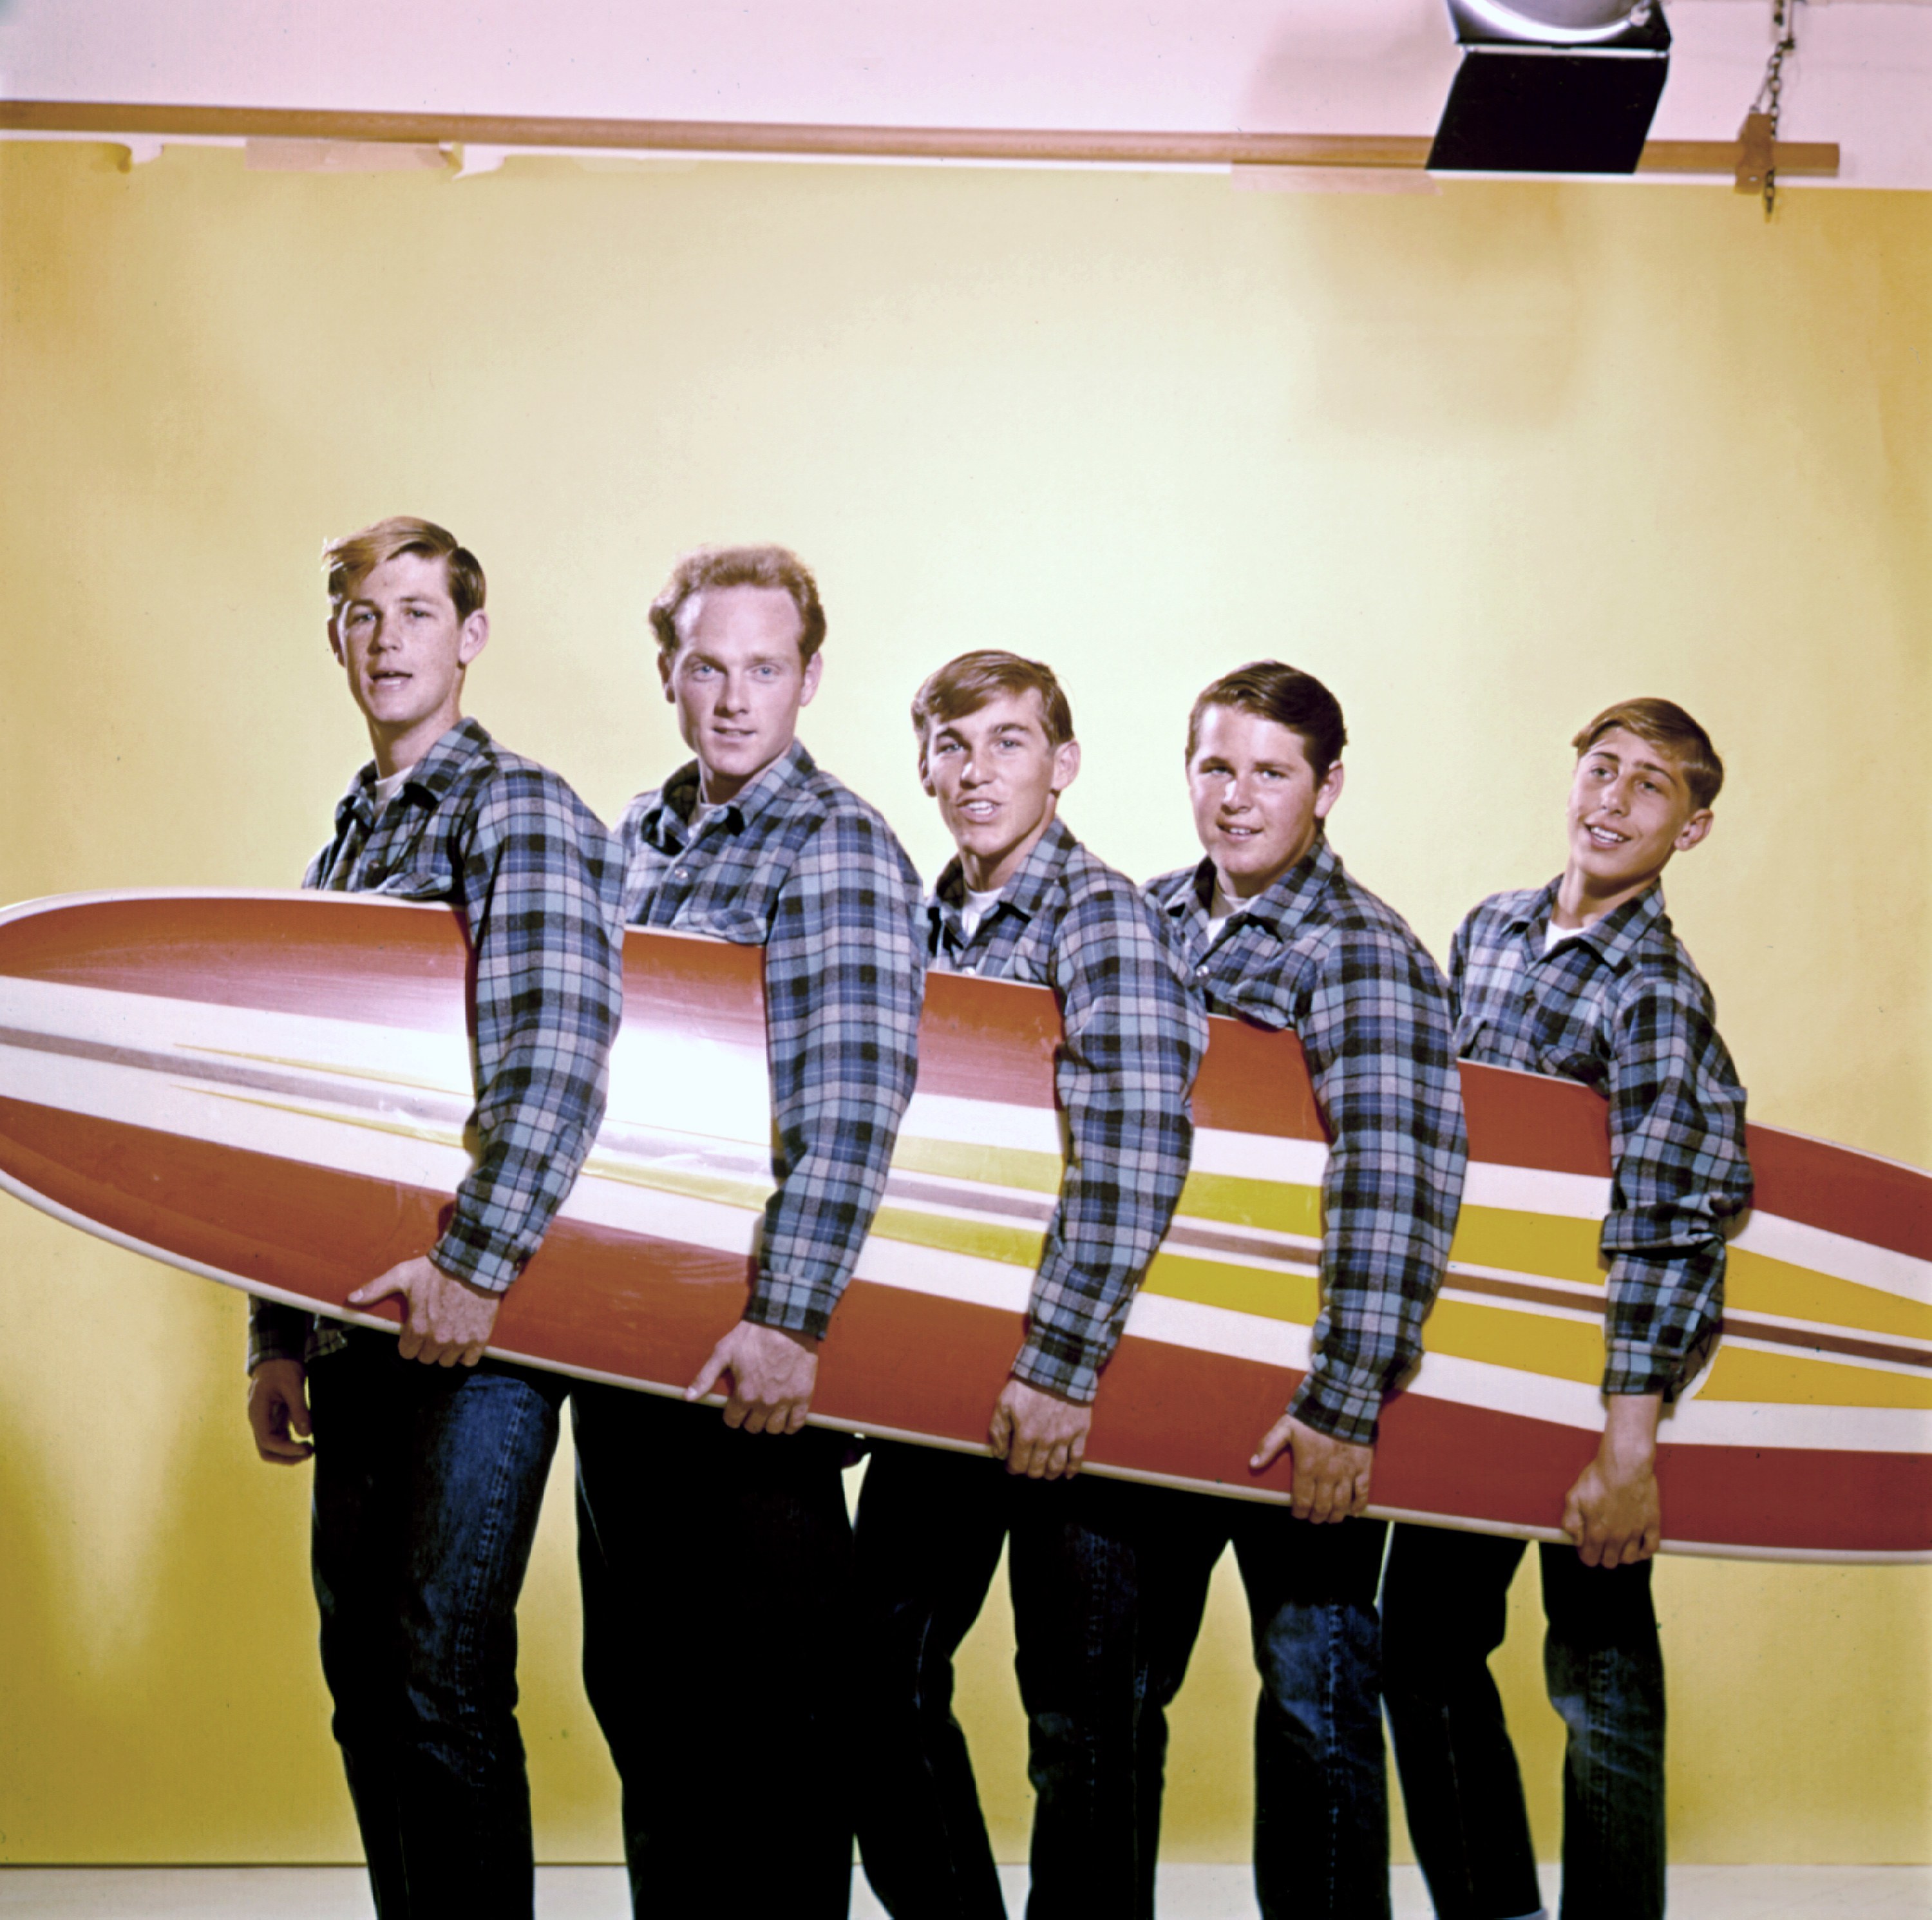 the group holding a surfboard